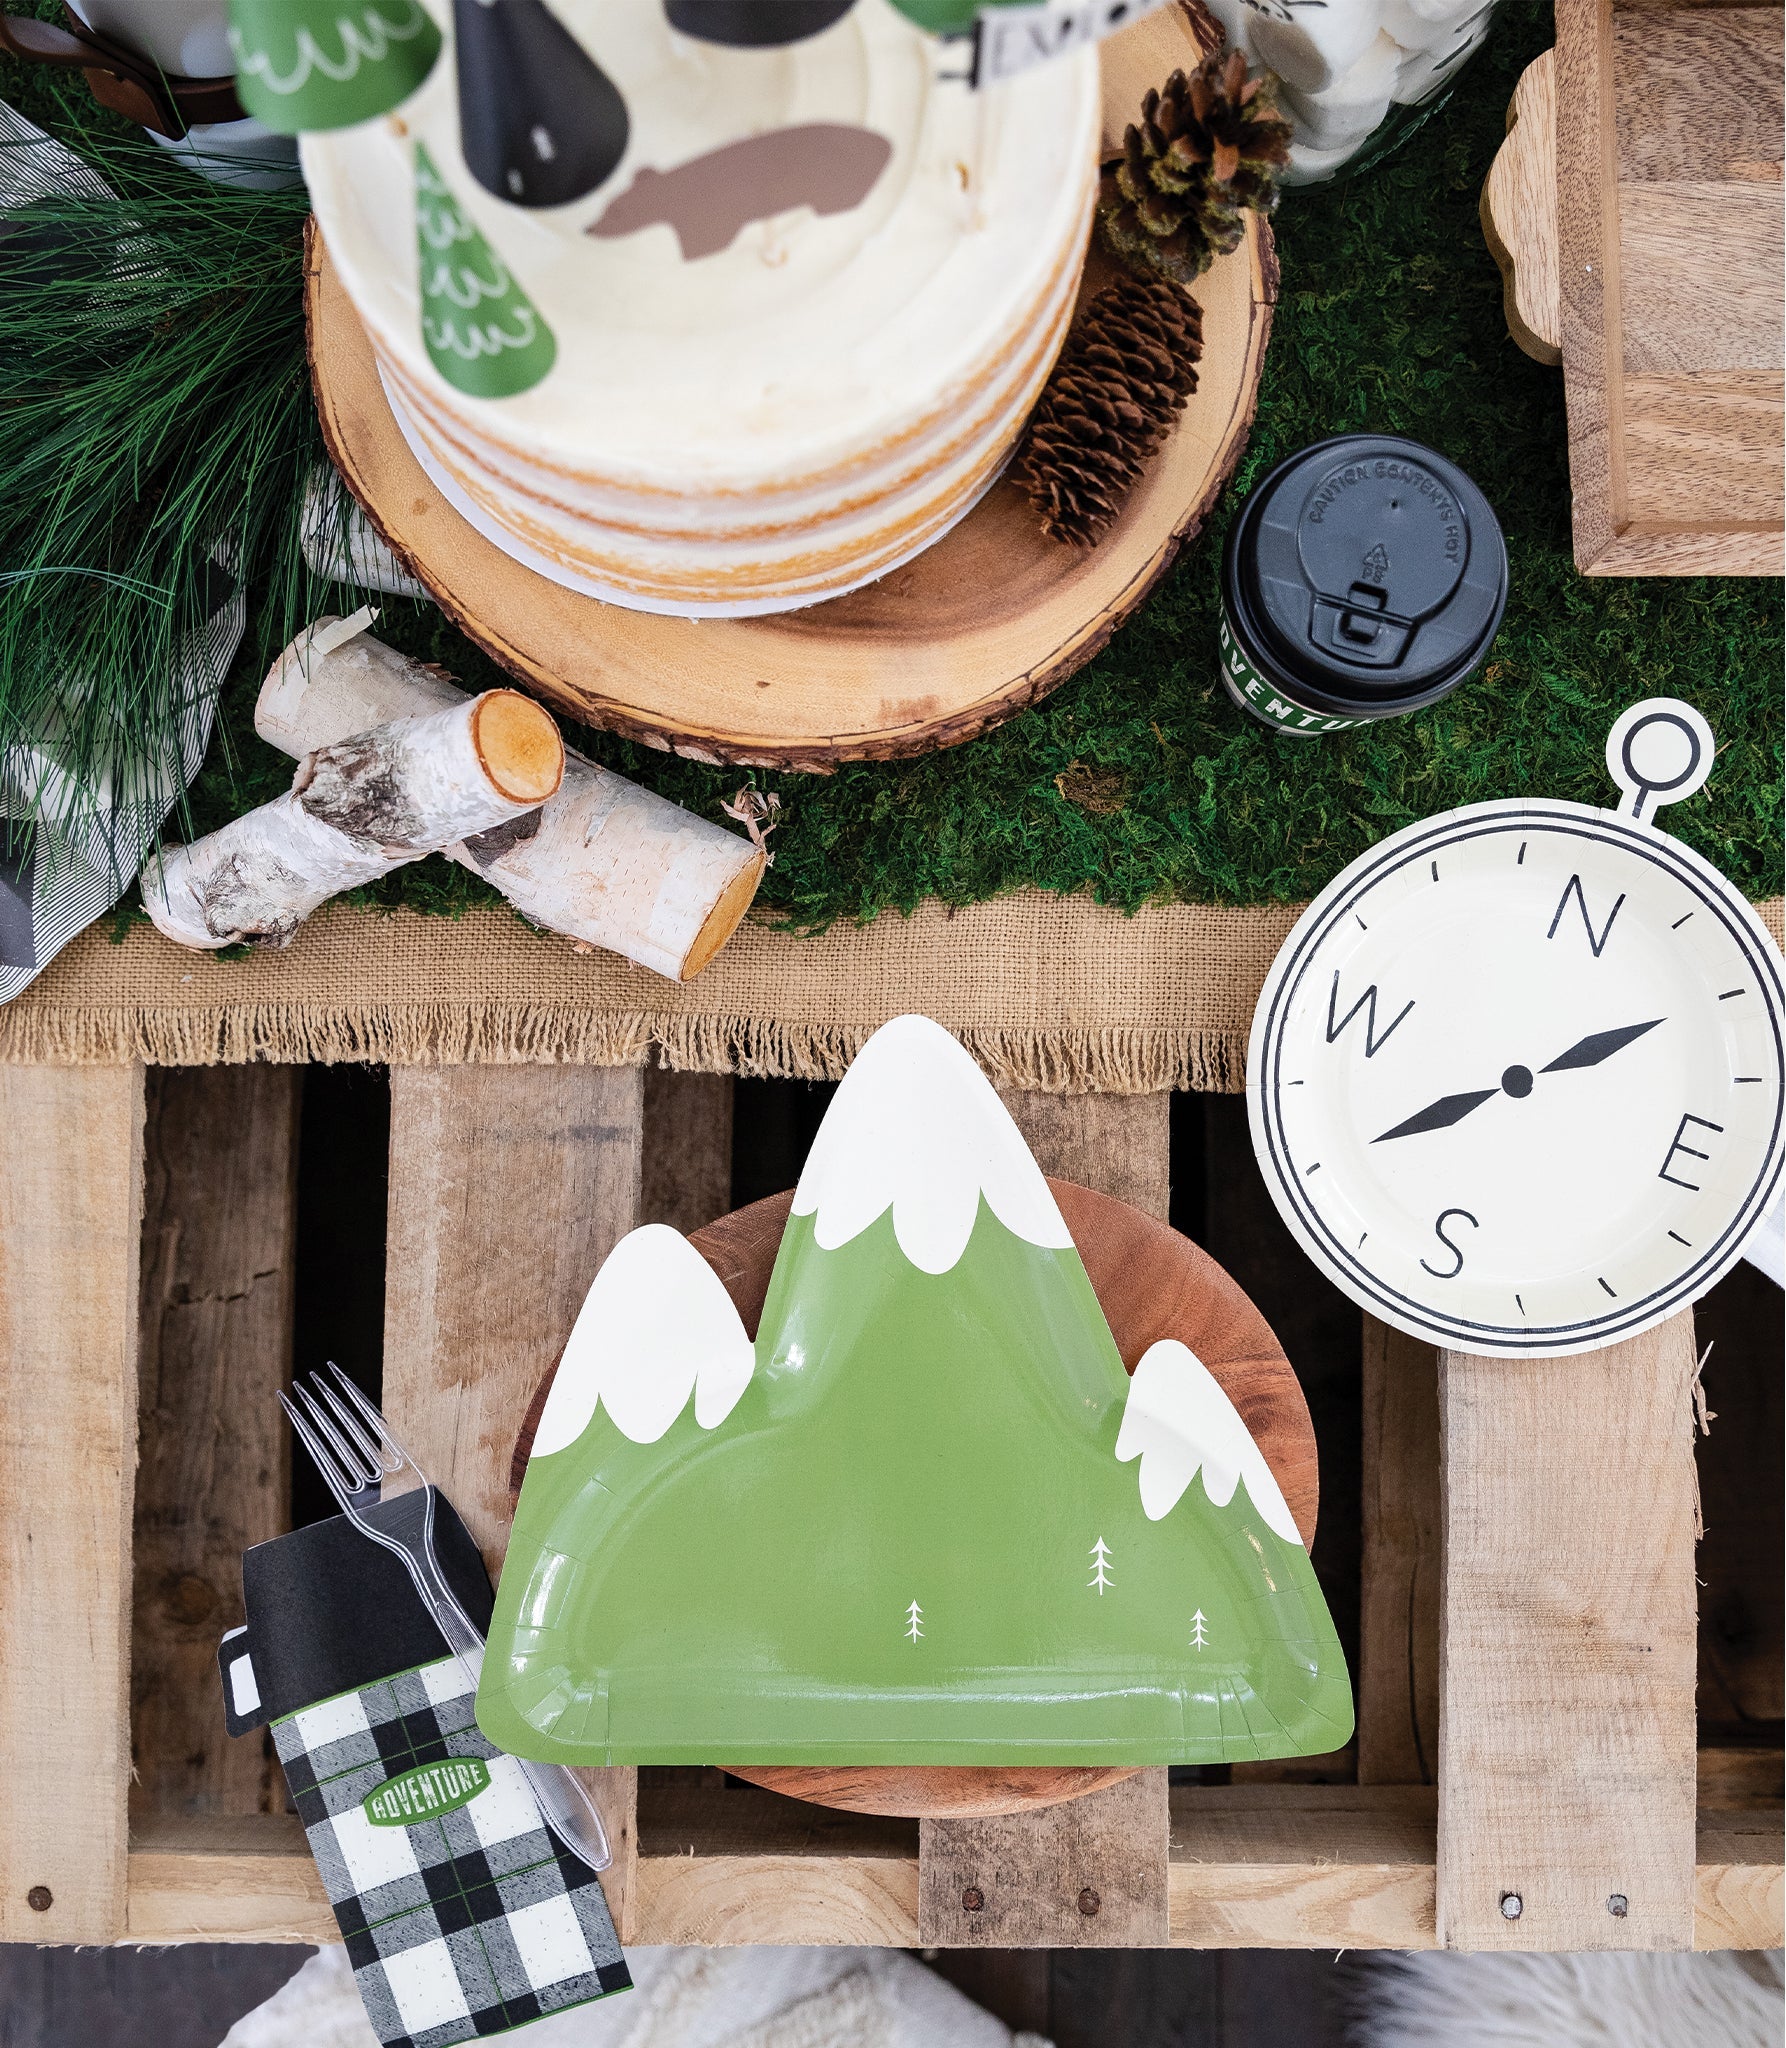 Adventure Mountain Shaped Plate - Oh My Darling Party Co-adventurecamperFaire #Fringe_Backdrop#